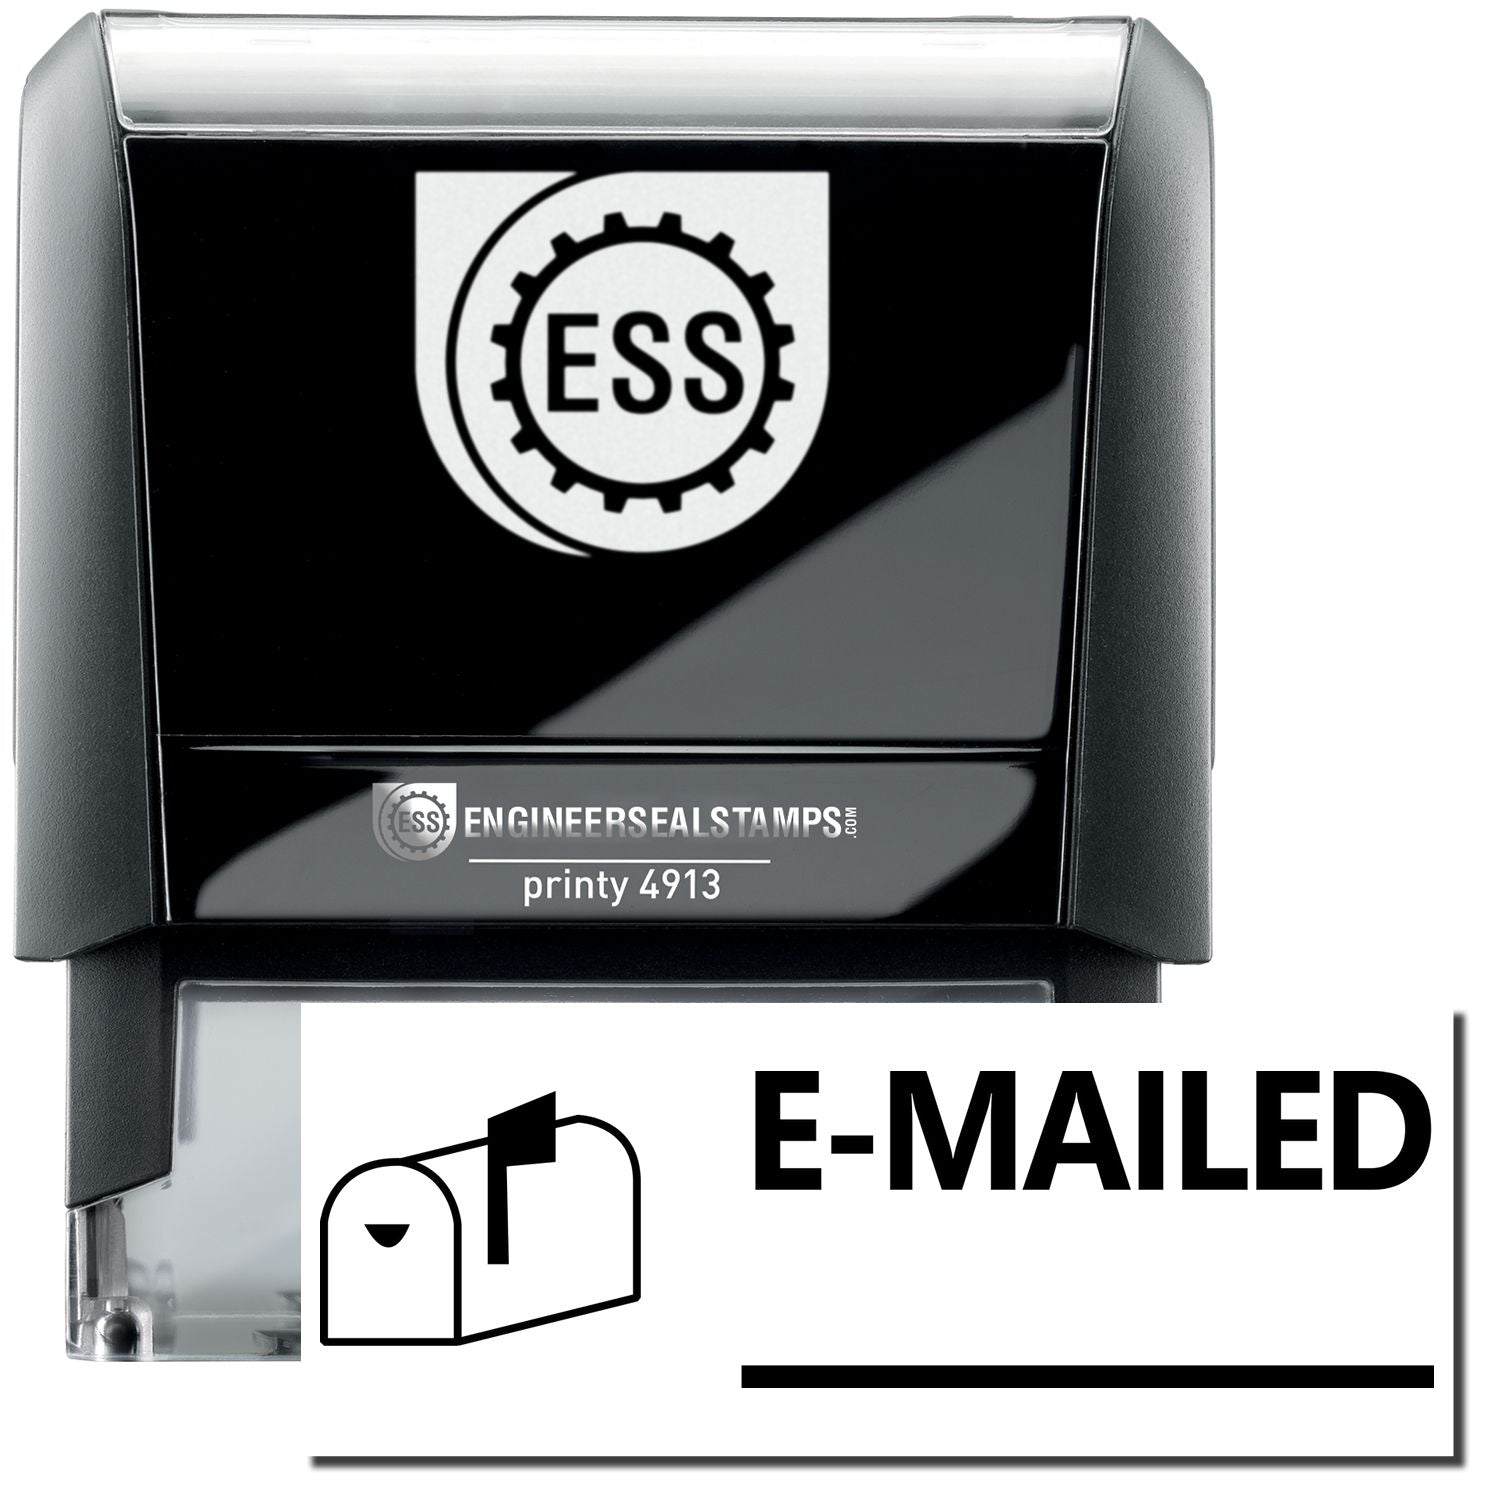 A self-inking stamp with a stamped image showing how the text "E-MAILED" in a large font with a line underneath and an image of a mailbox with the flag up on the left side is displayed after stamping.